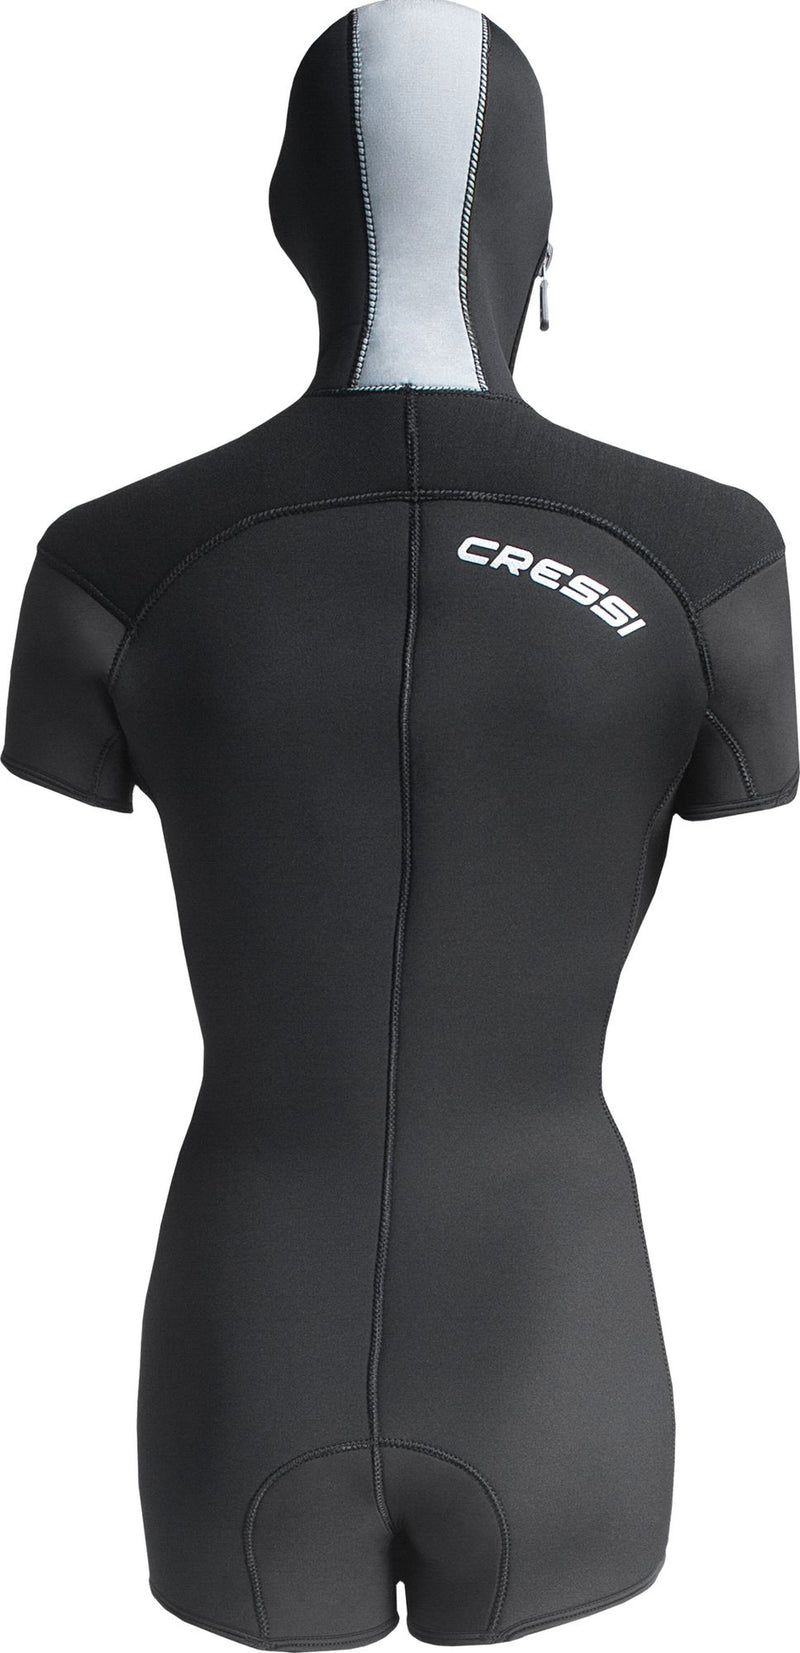 Cressi Shell Oversuit Jacket Lady sovramuta donna spiaggia immersion subacque apnea nuoto pesca corpett scuba diving spearfishing freediving snorkeling & beach paddling swimming neoprene vest undersuit wetsuit accessor oversuit lady